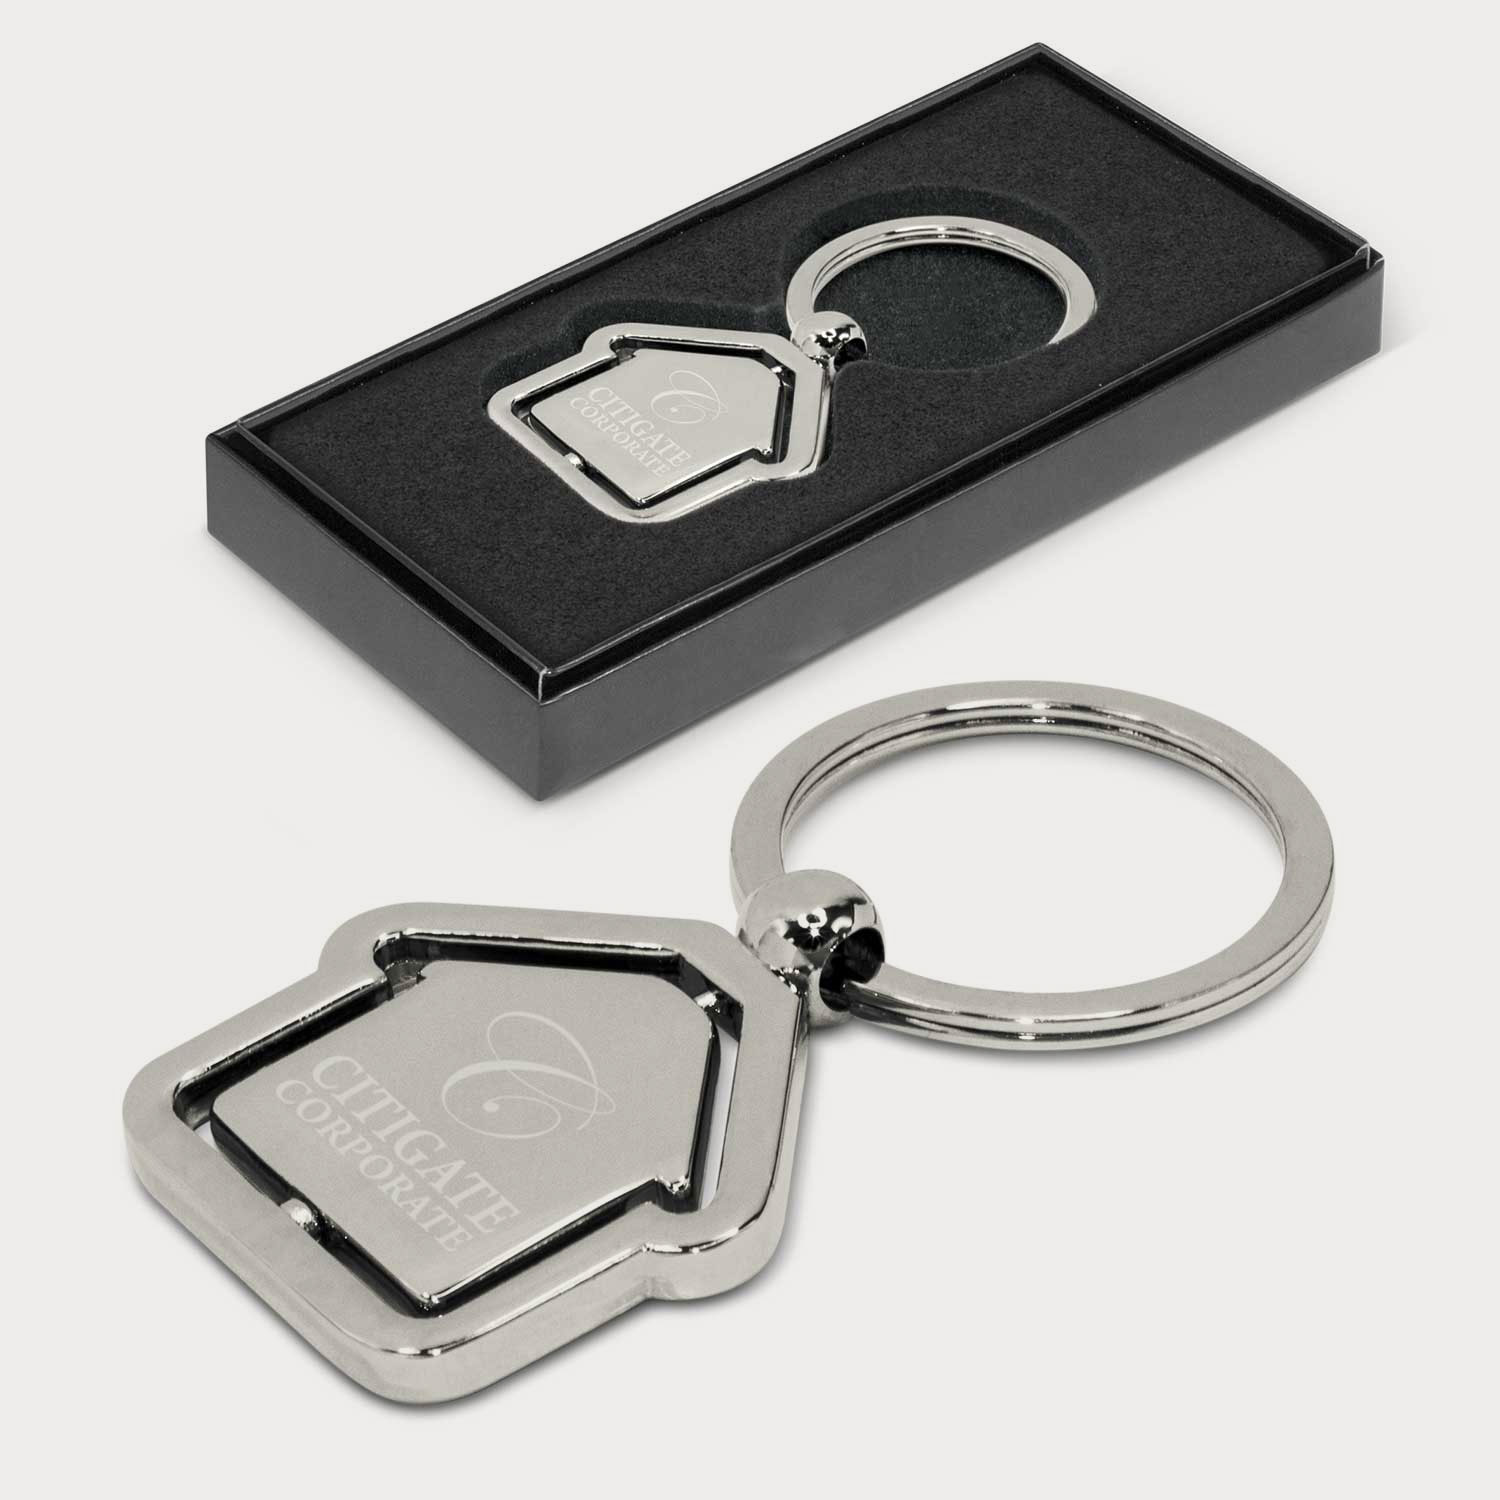 Key ring - metal cut out sheep with NZ charms - Adore Collection